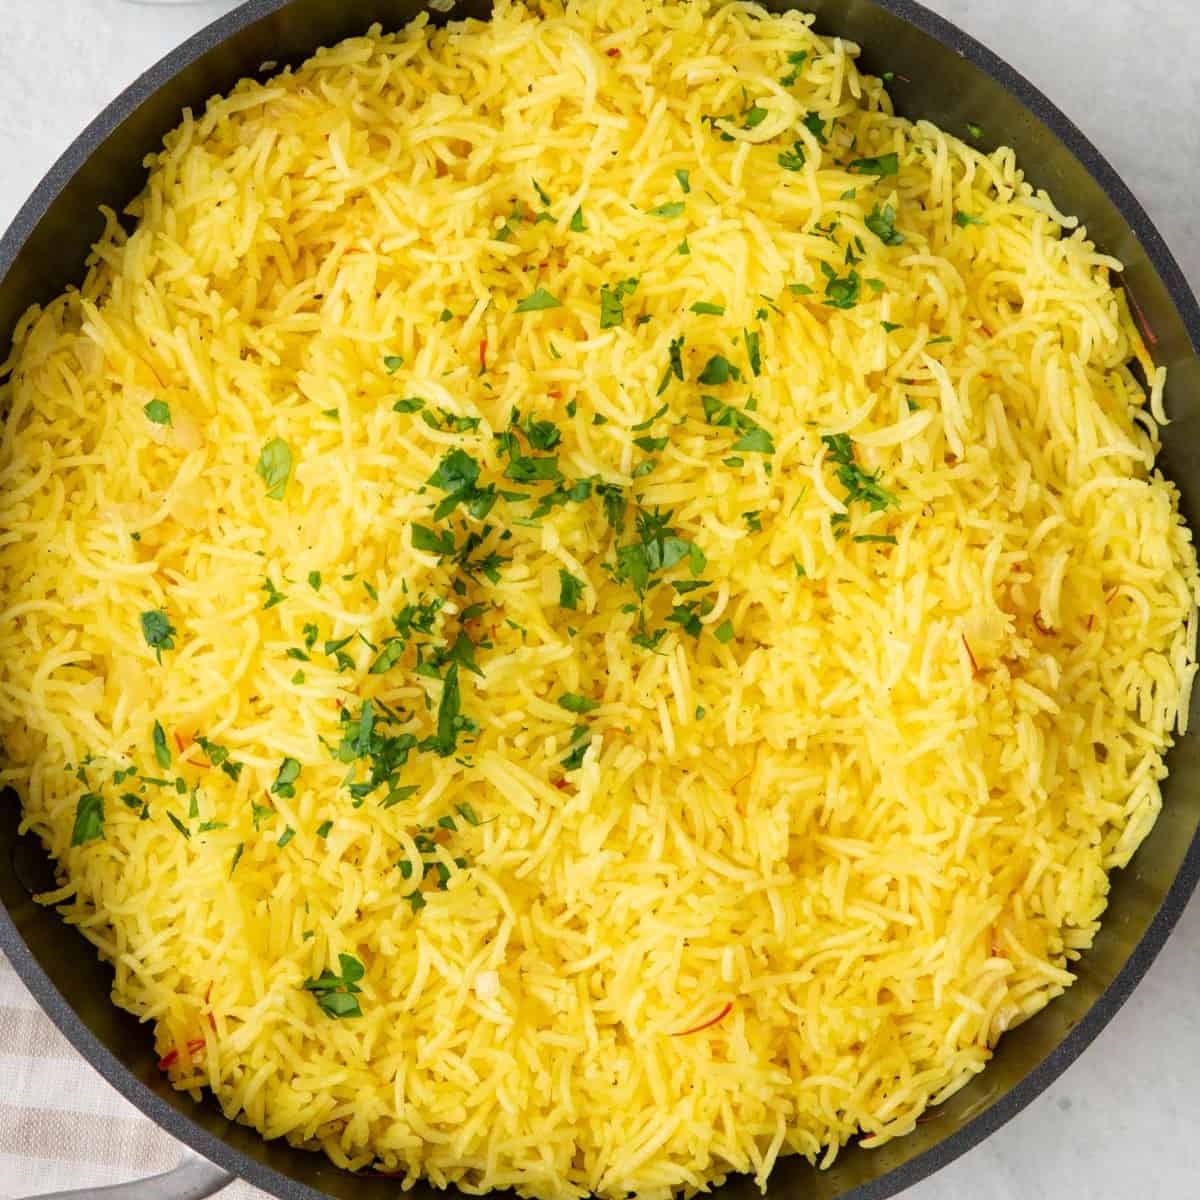 Square image of a pan of golden saffron rice.